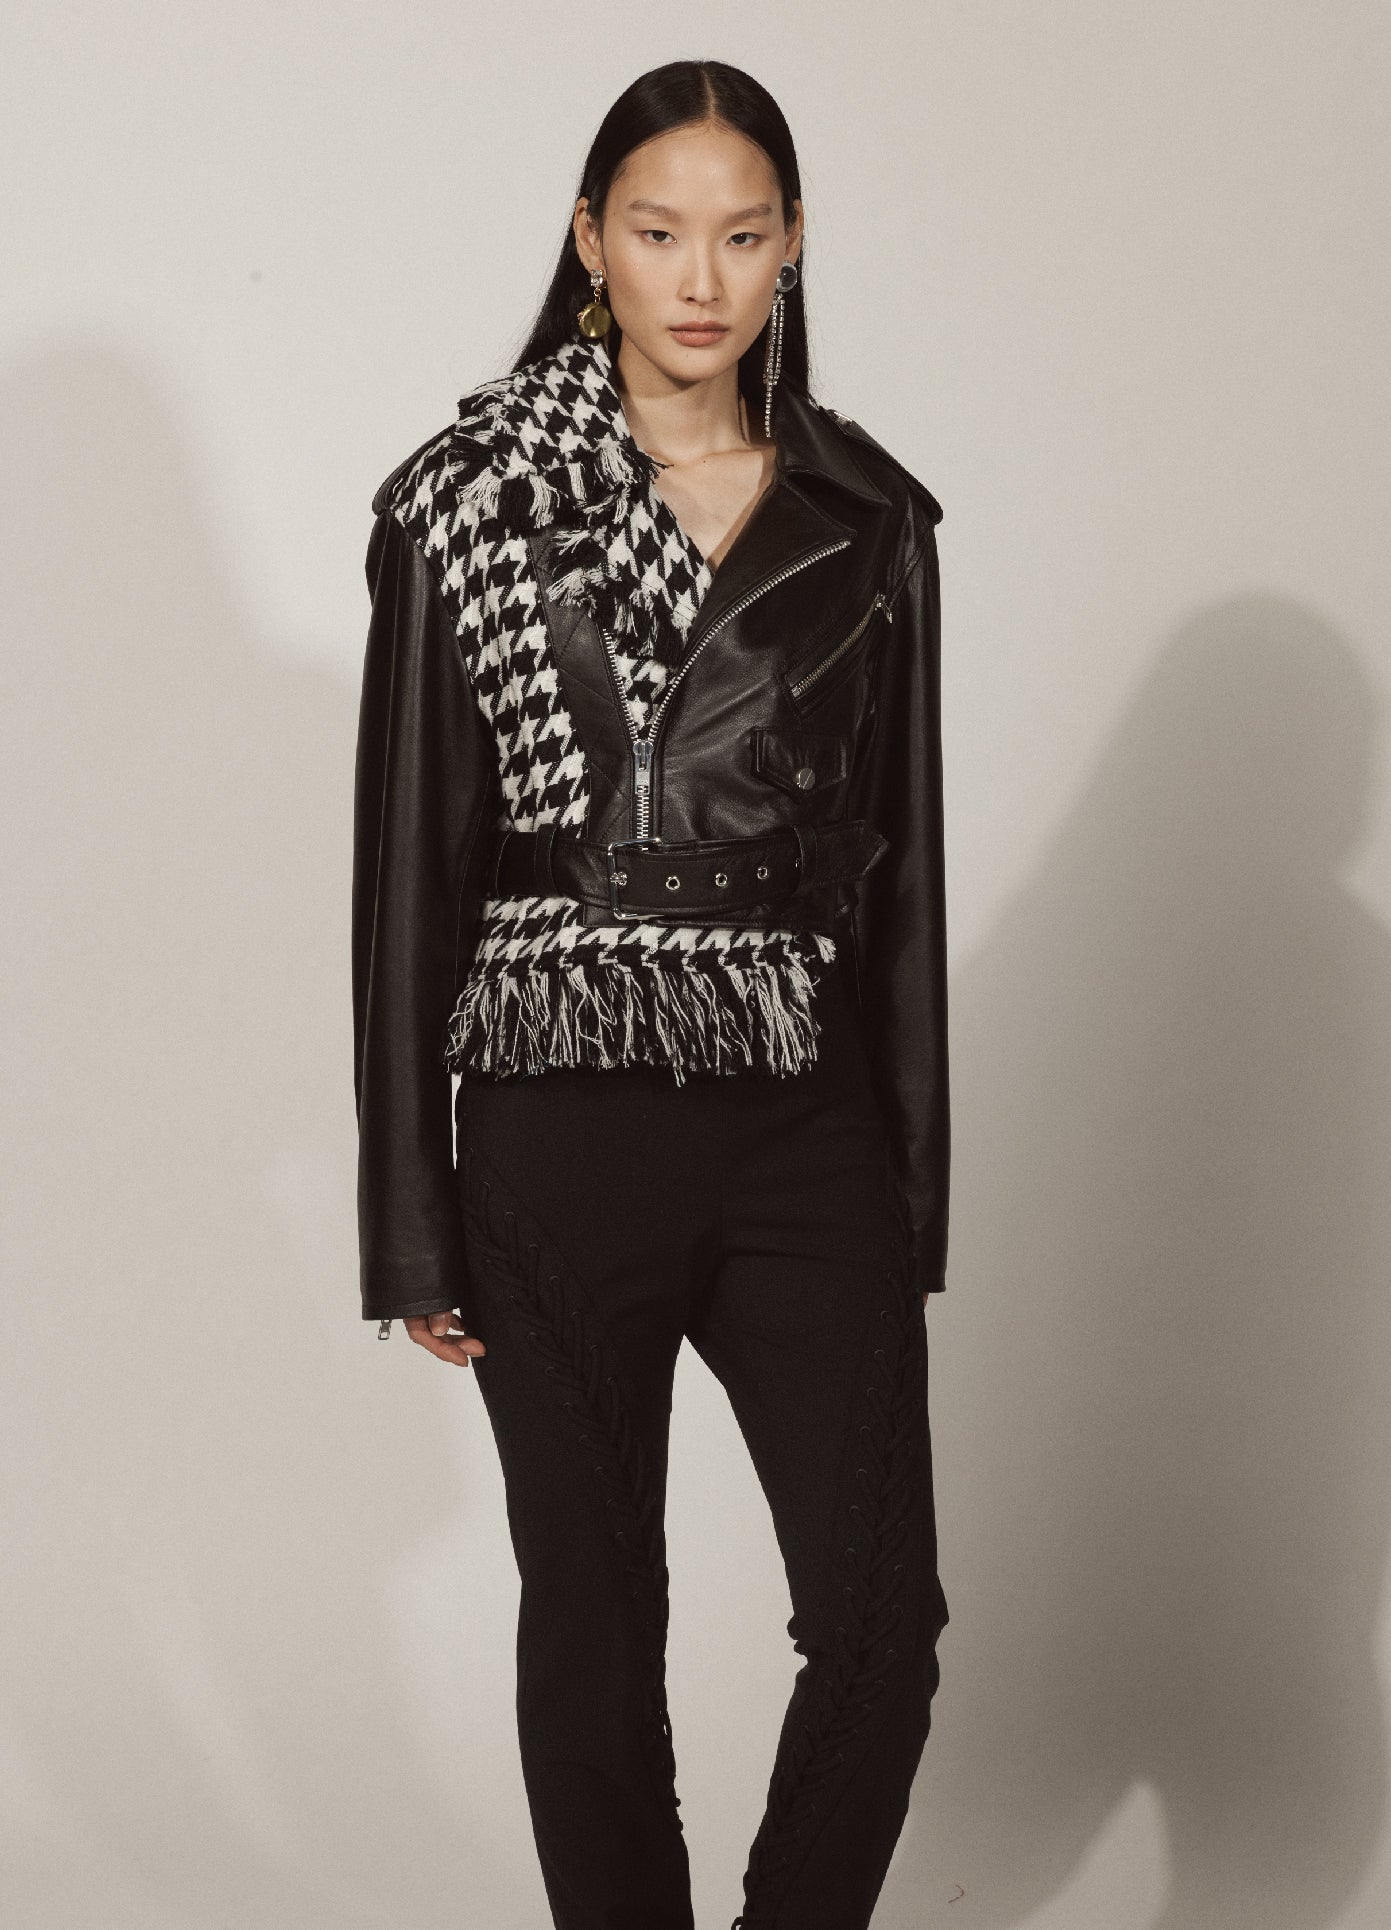 MONSE Cropped Tweed Leather Jacket in Black and White on Model Front View